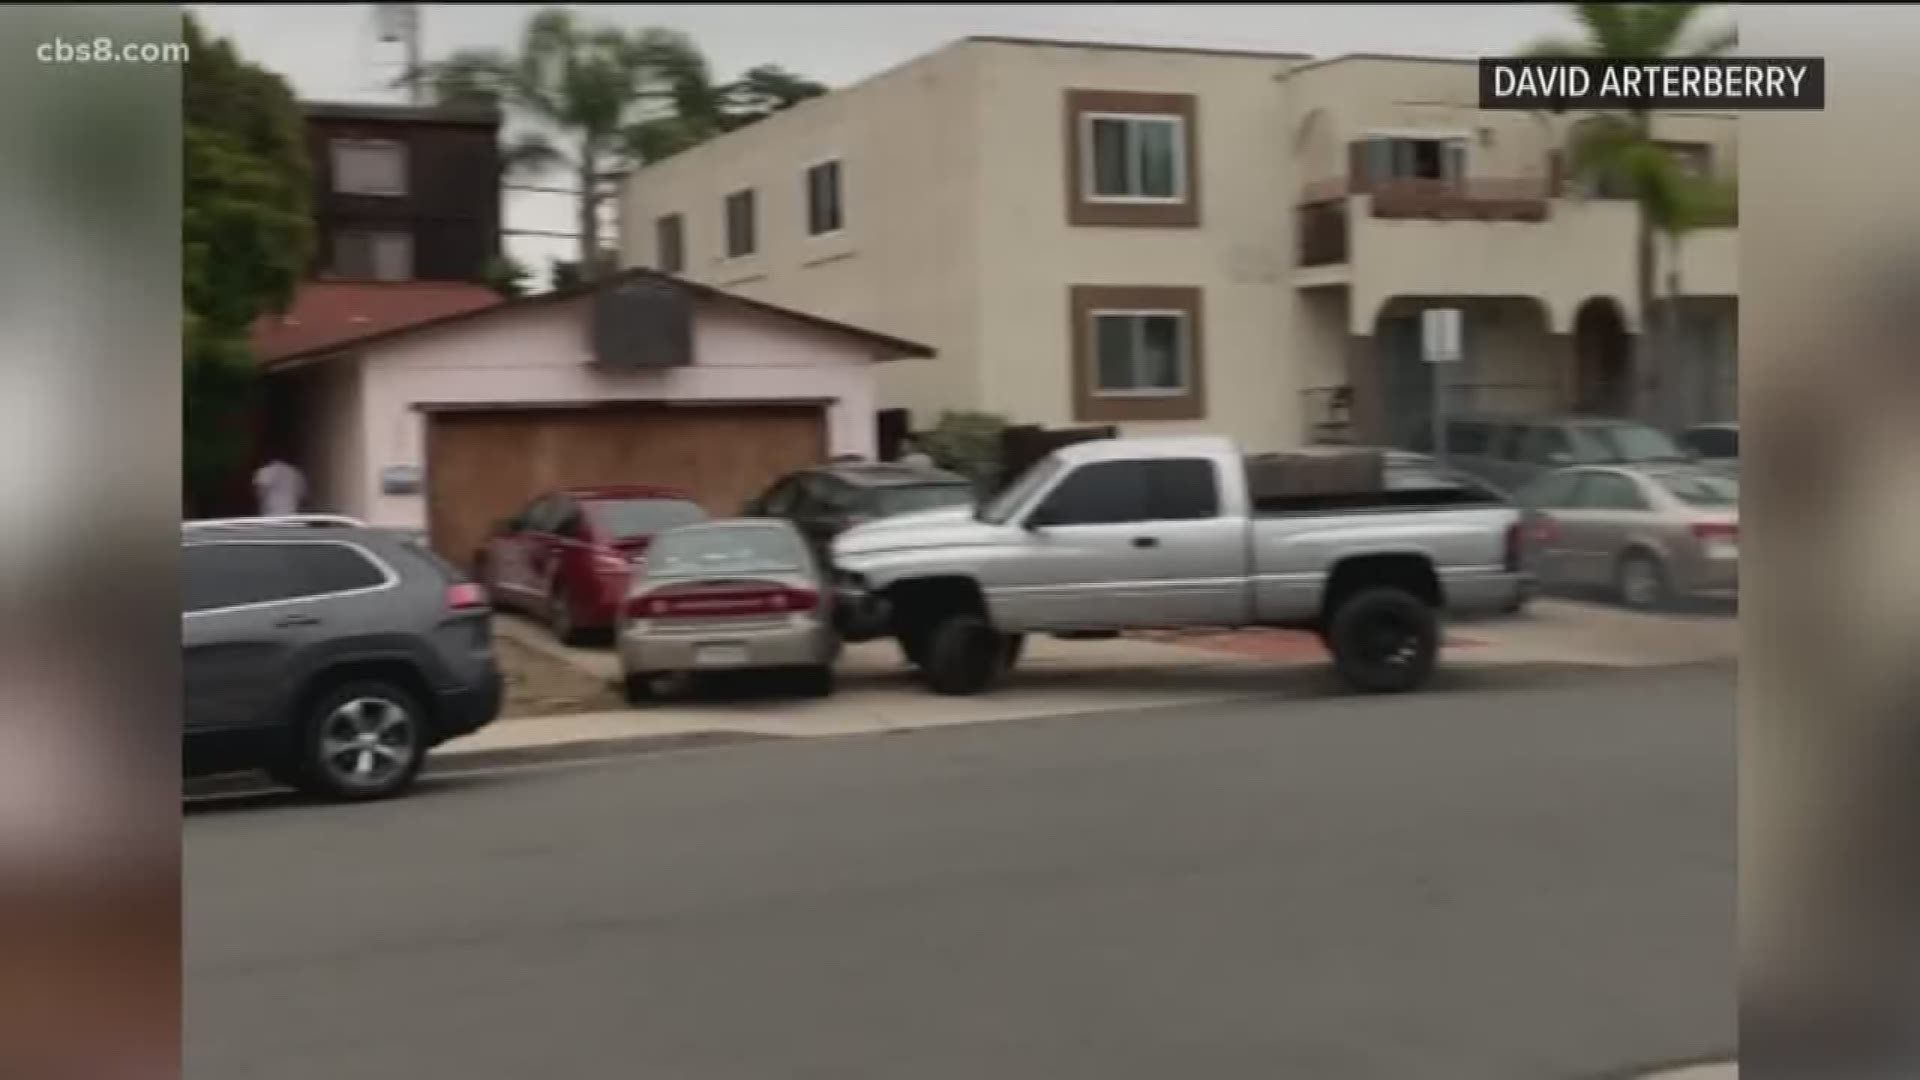 Video captured the man driving erratically and smashing into parked cars along Shasta Street while neighbors watch – afraid for their own safety.